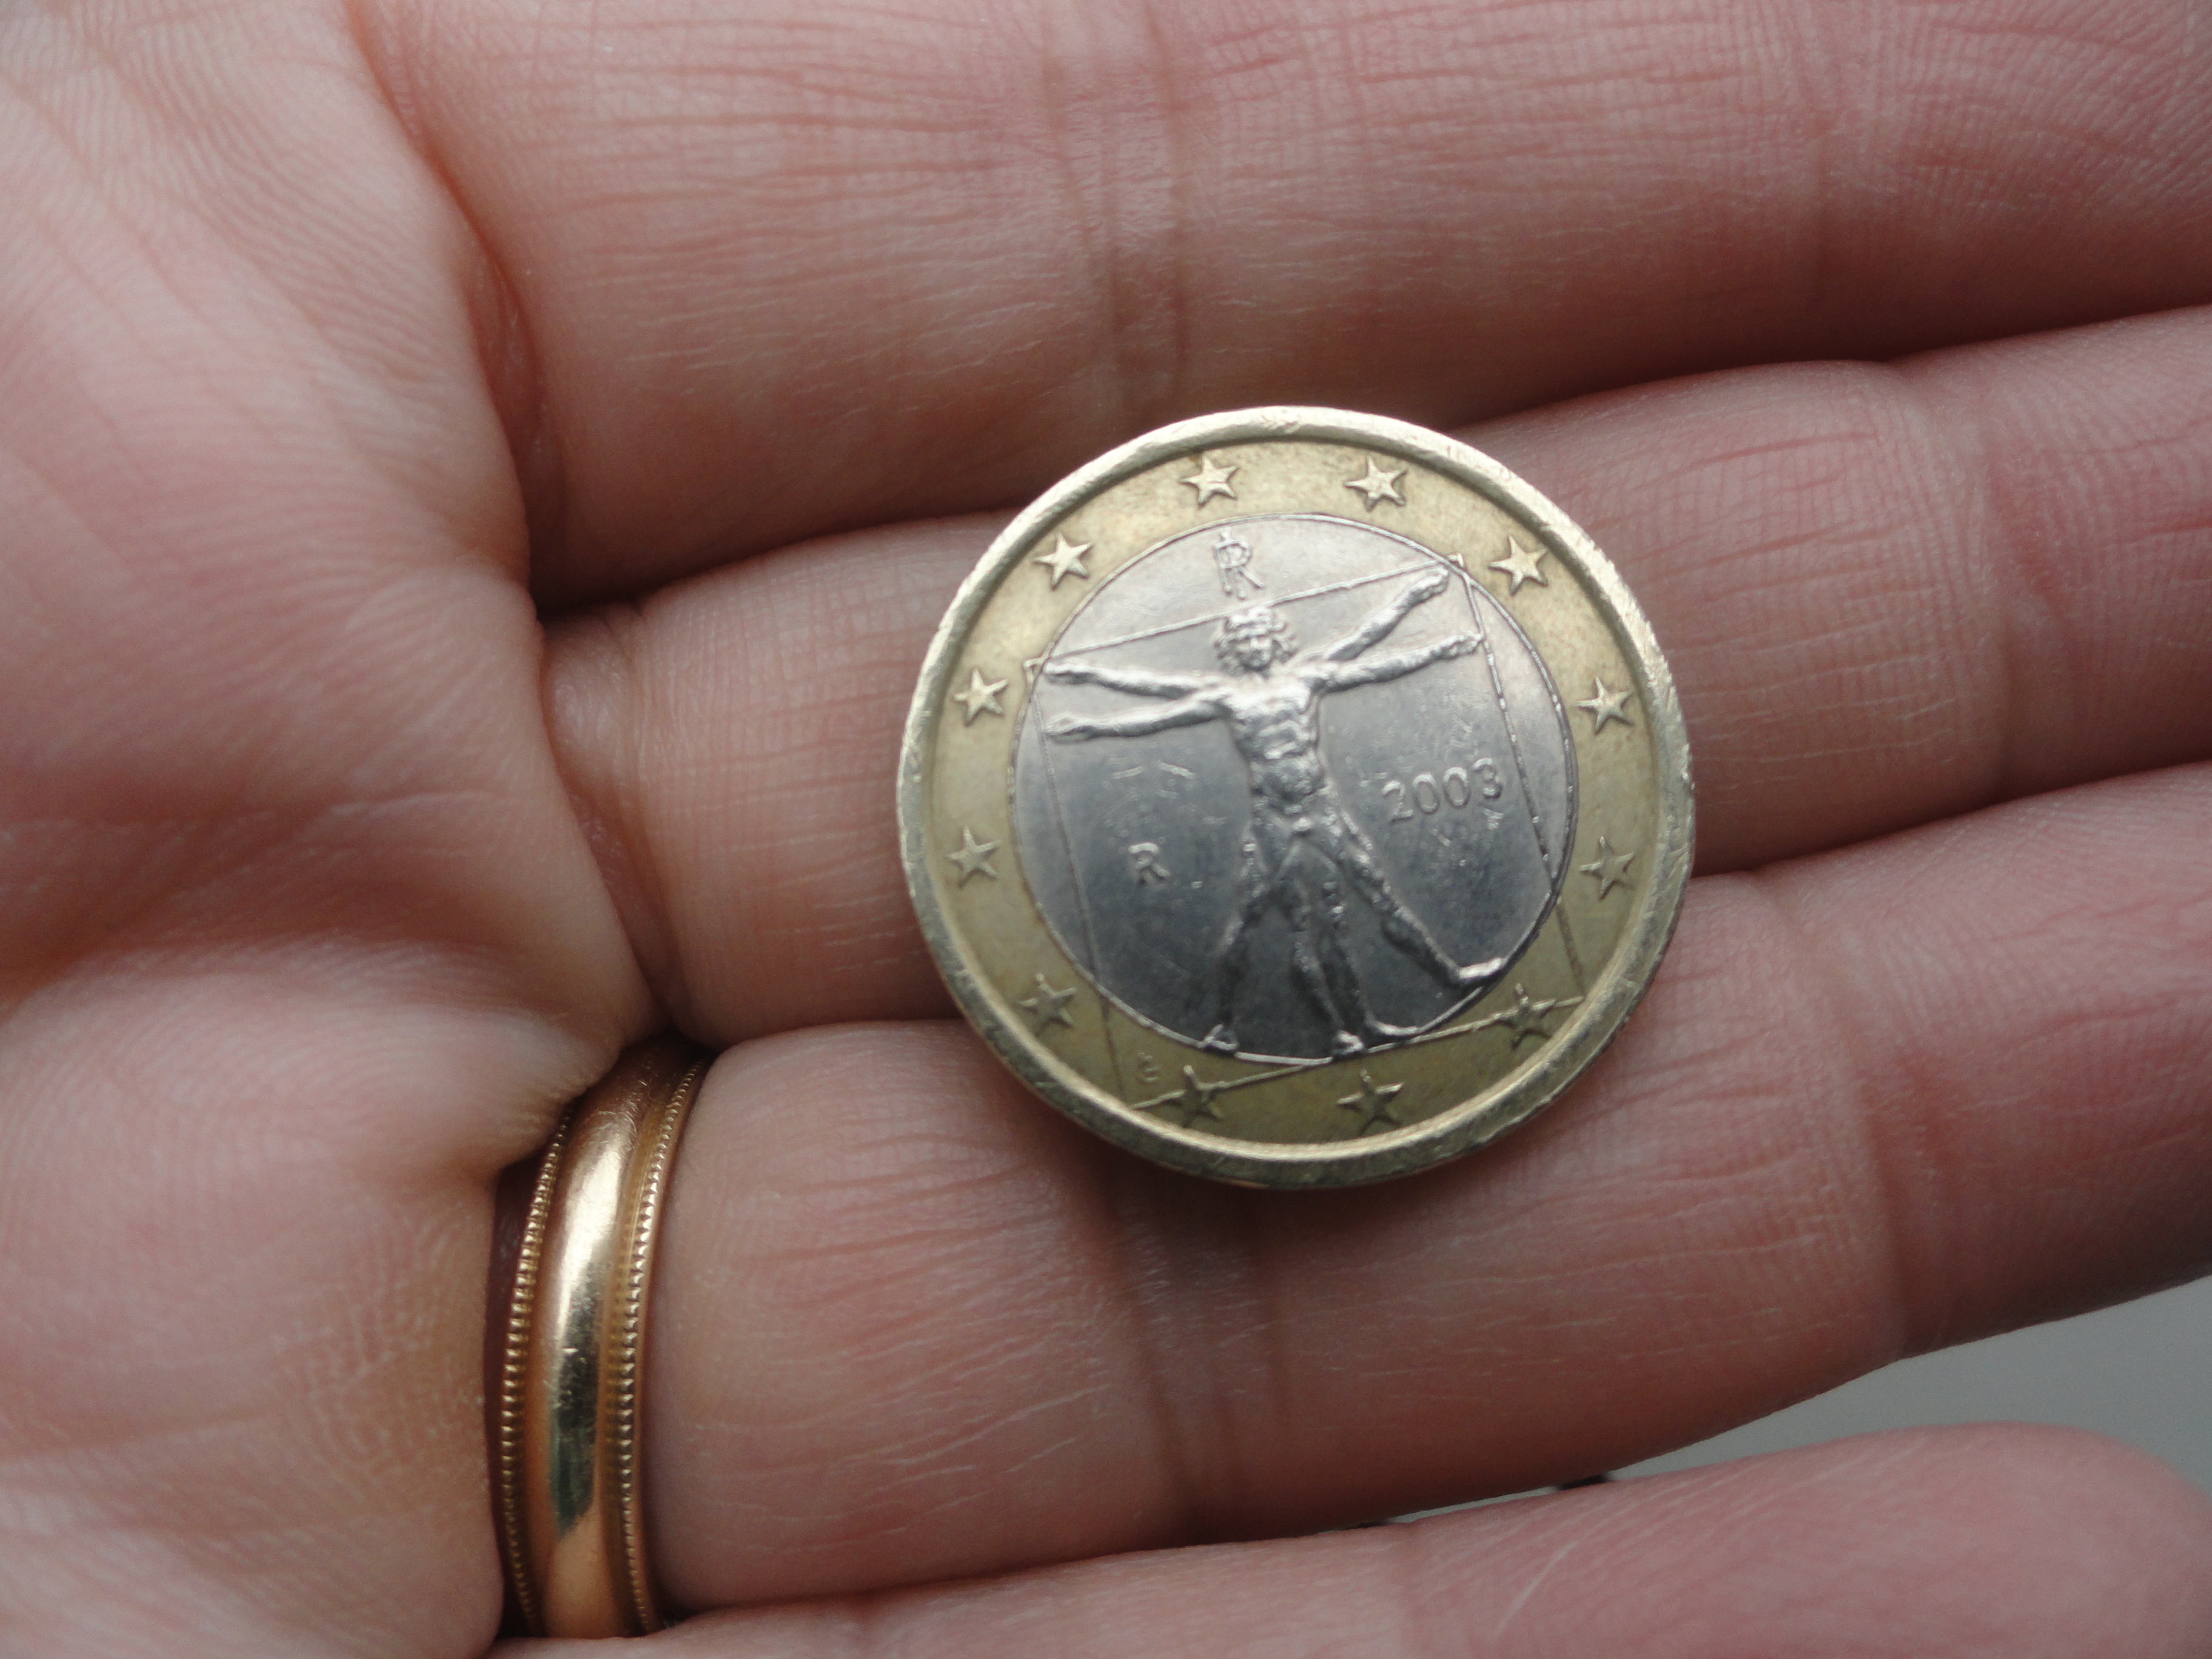  a Euro coin with Vetruvian Man on it